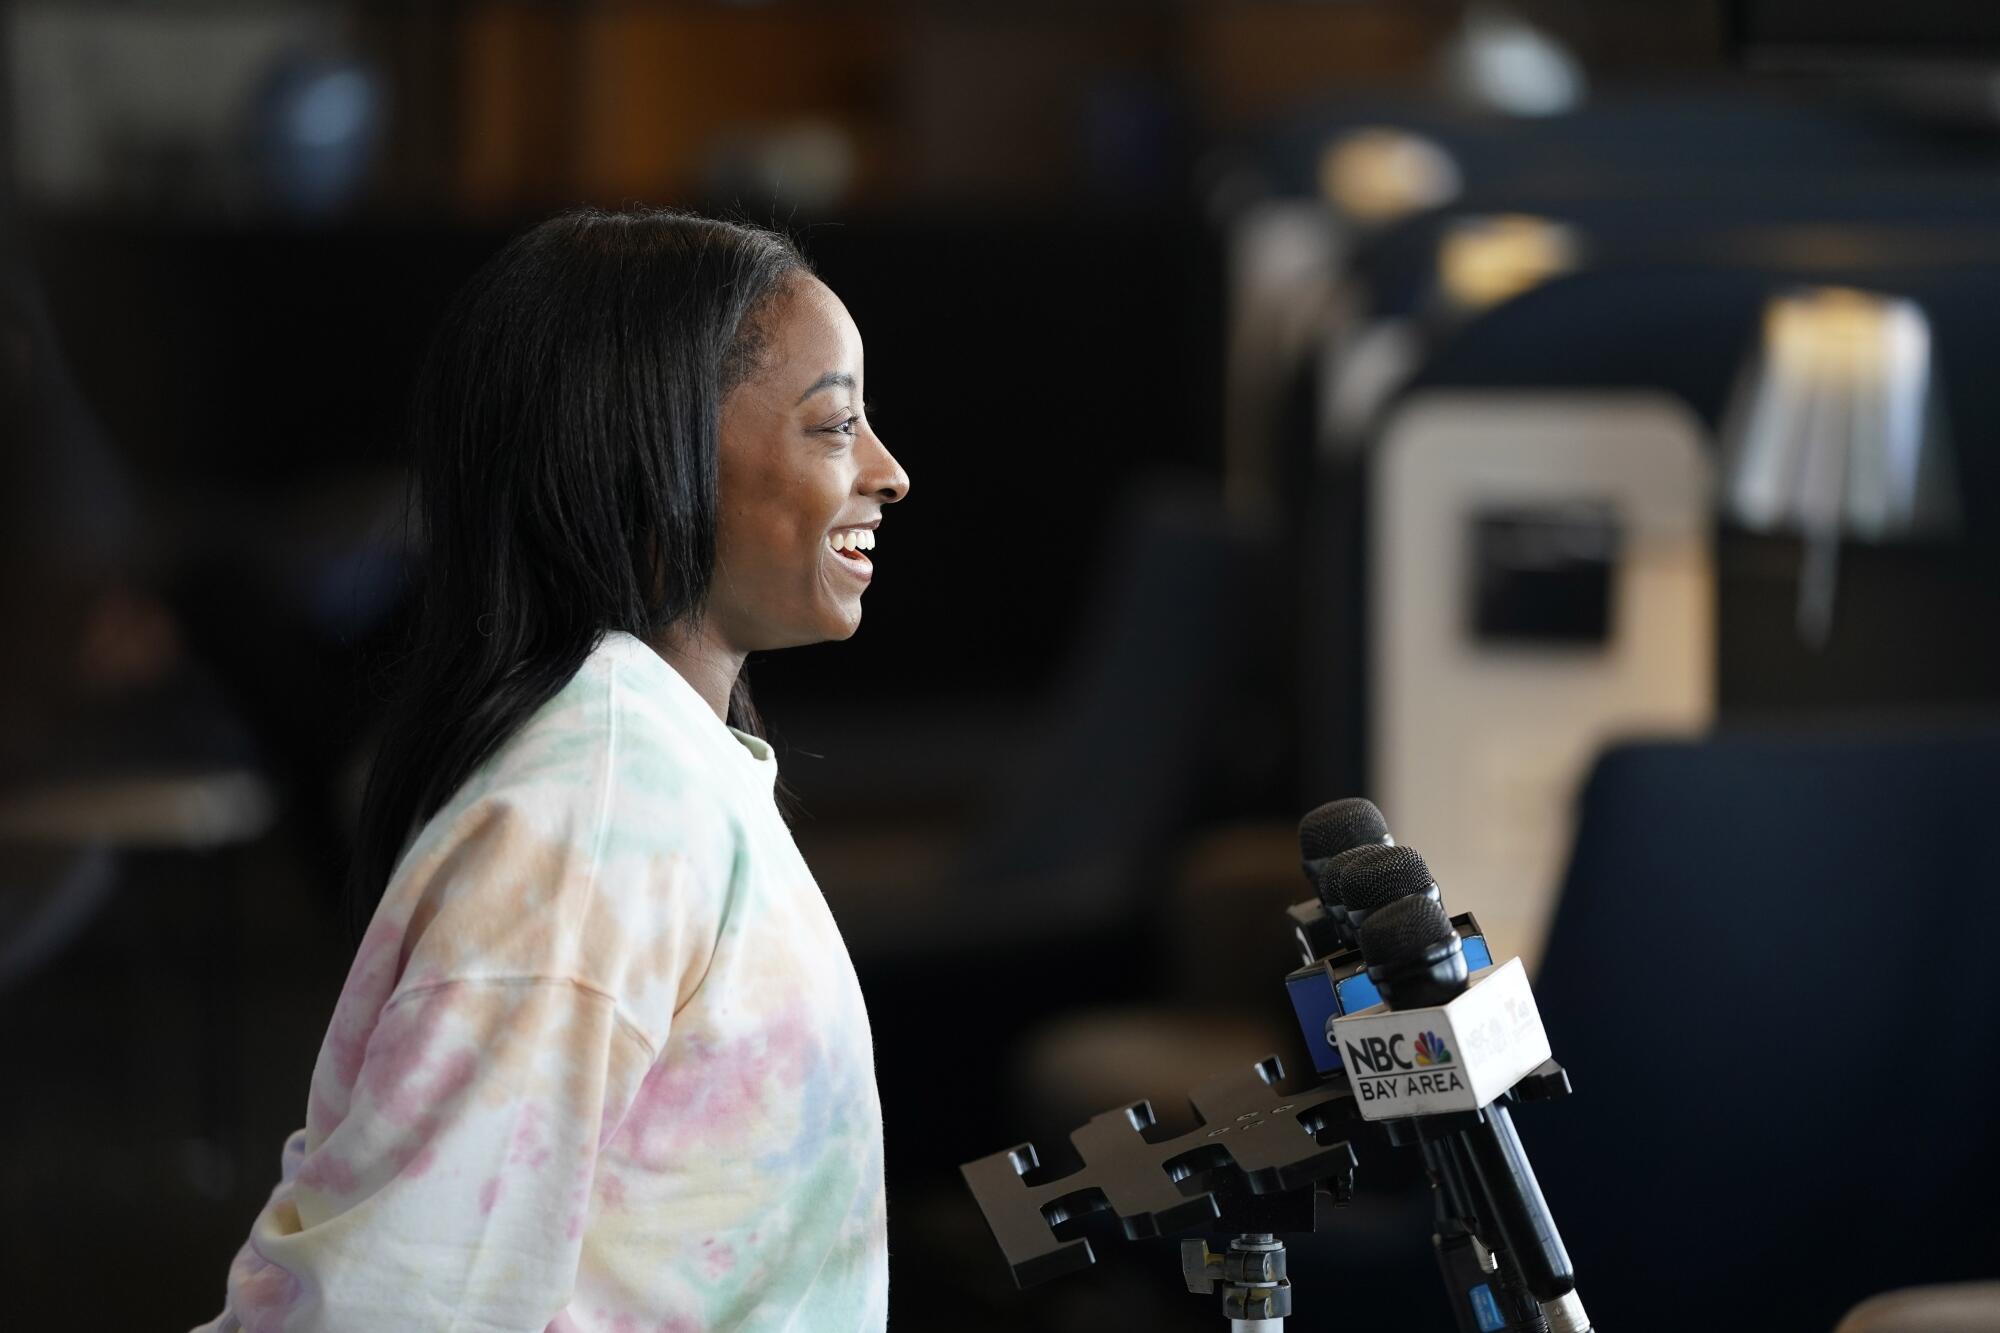 Simone Biles smiles during interviews at a United Airlines send-off event